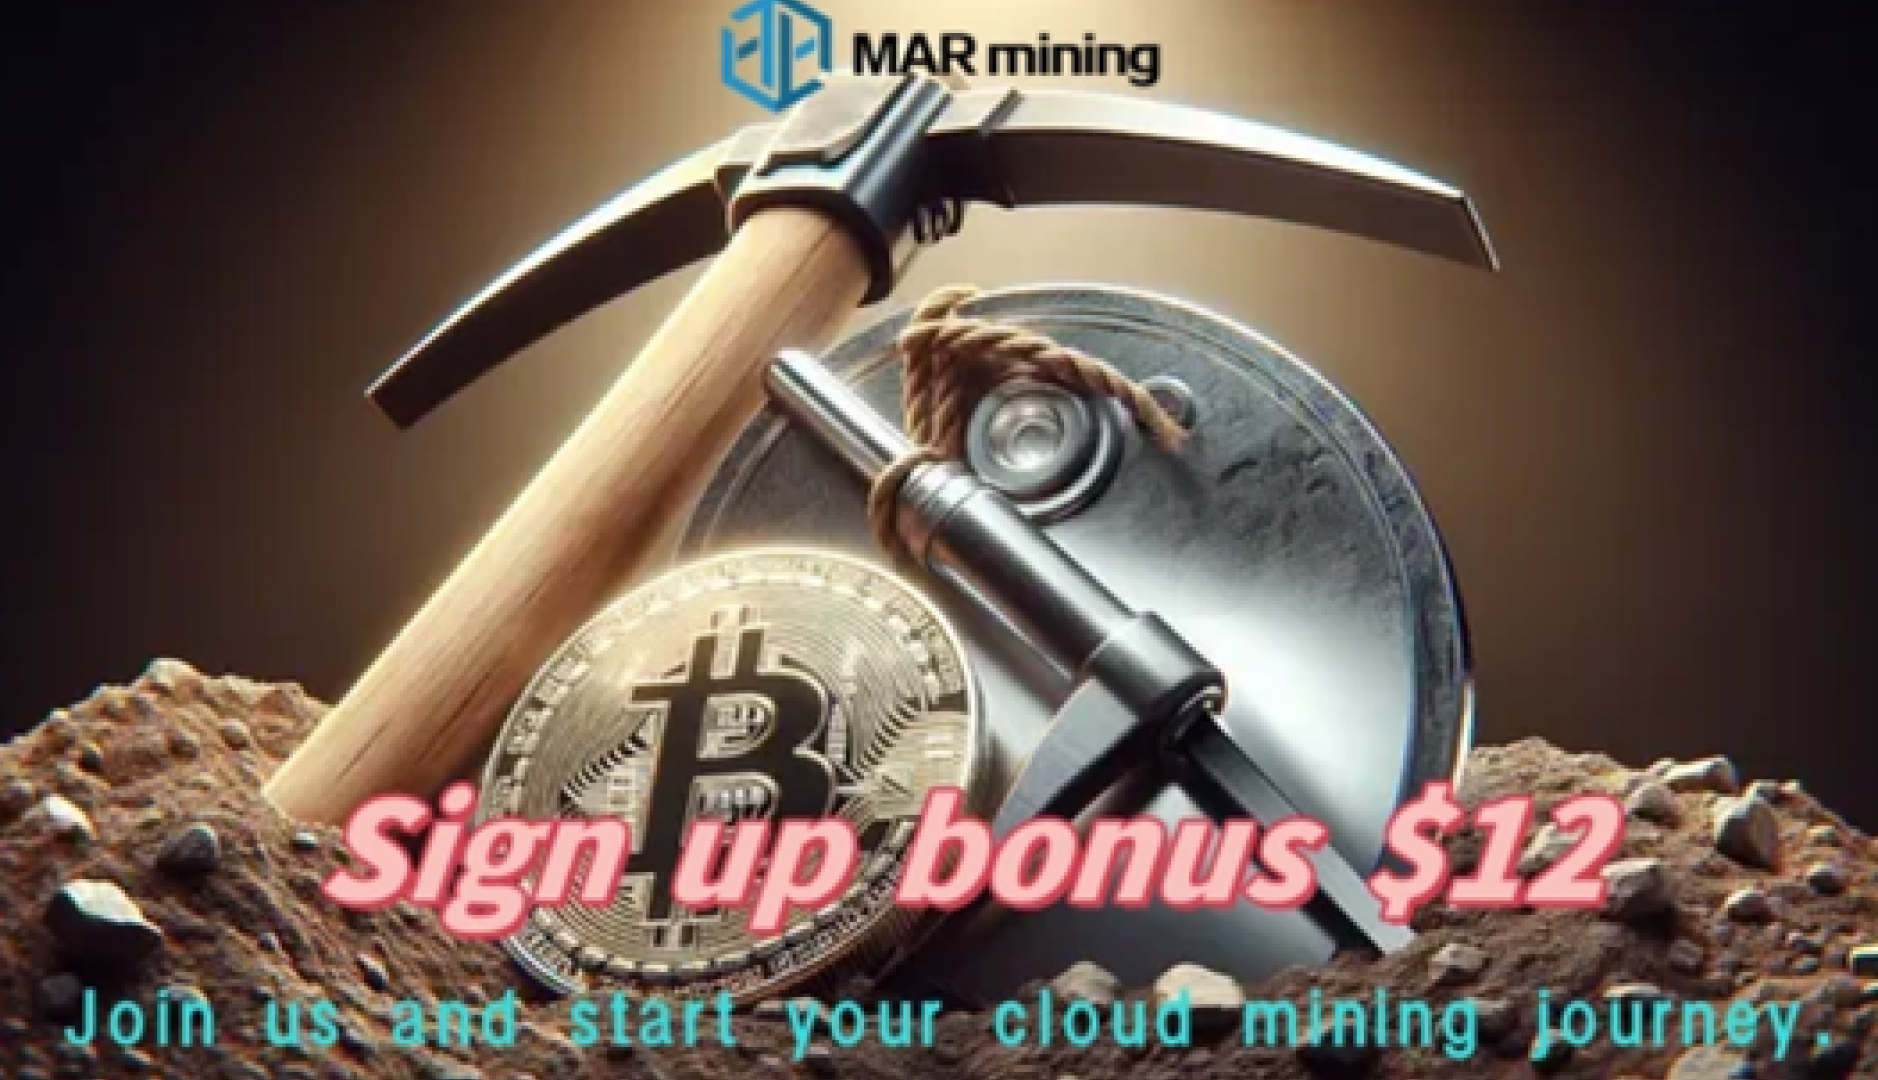 What is cloud mining? MAR mining teaches you how to use cloud mining to earn passive income.